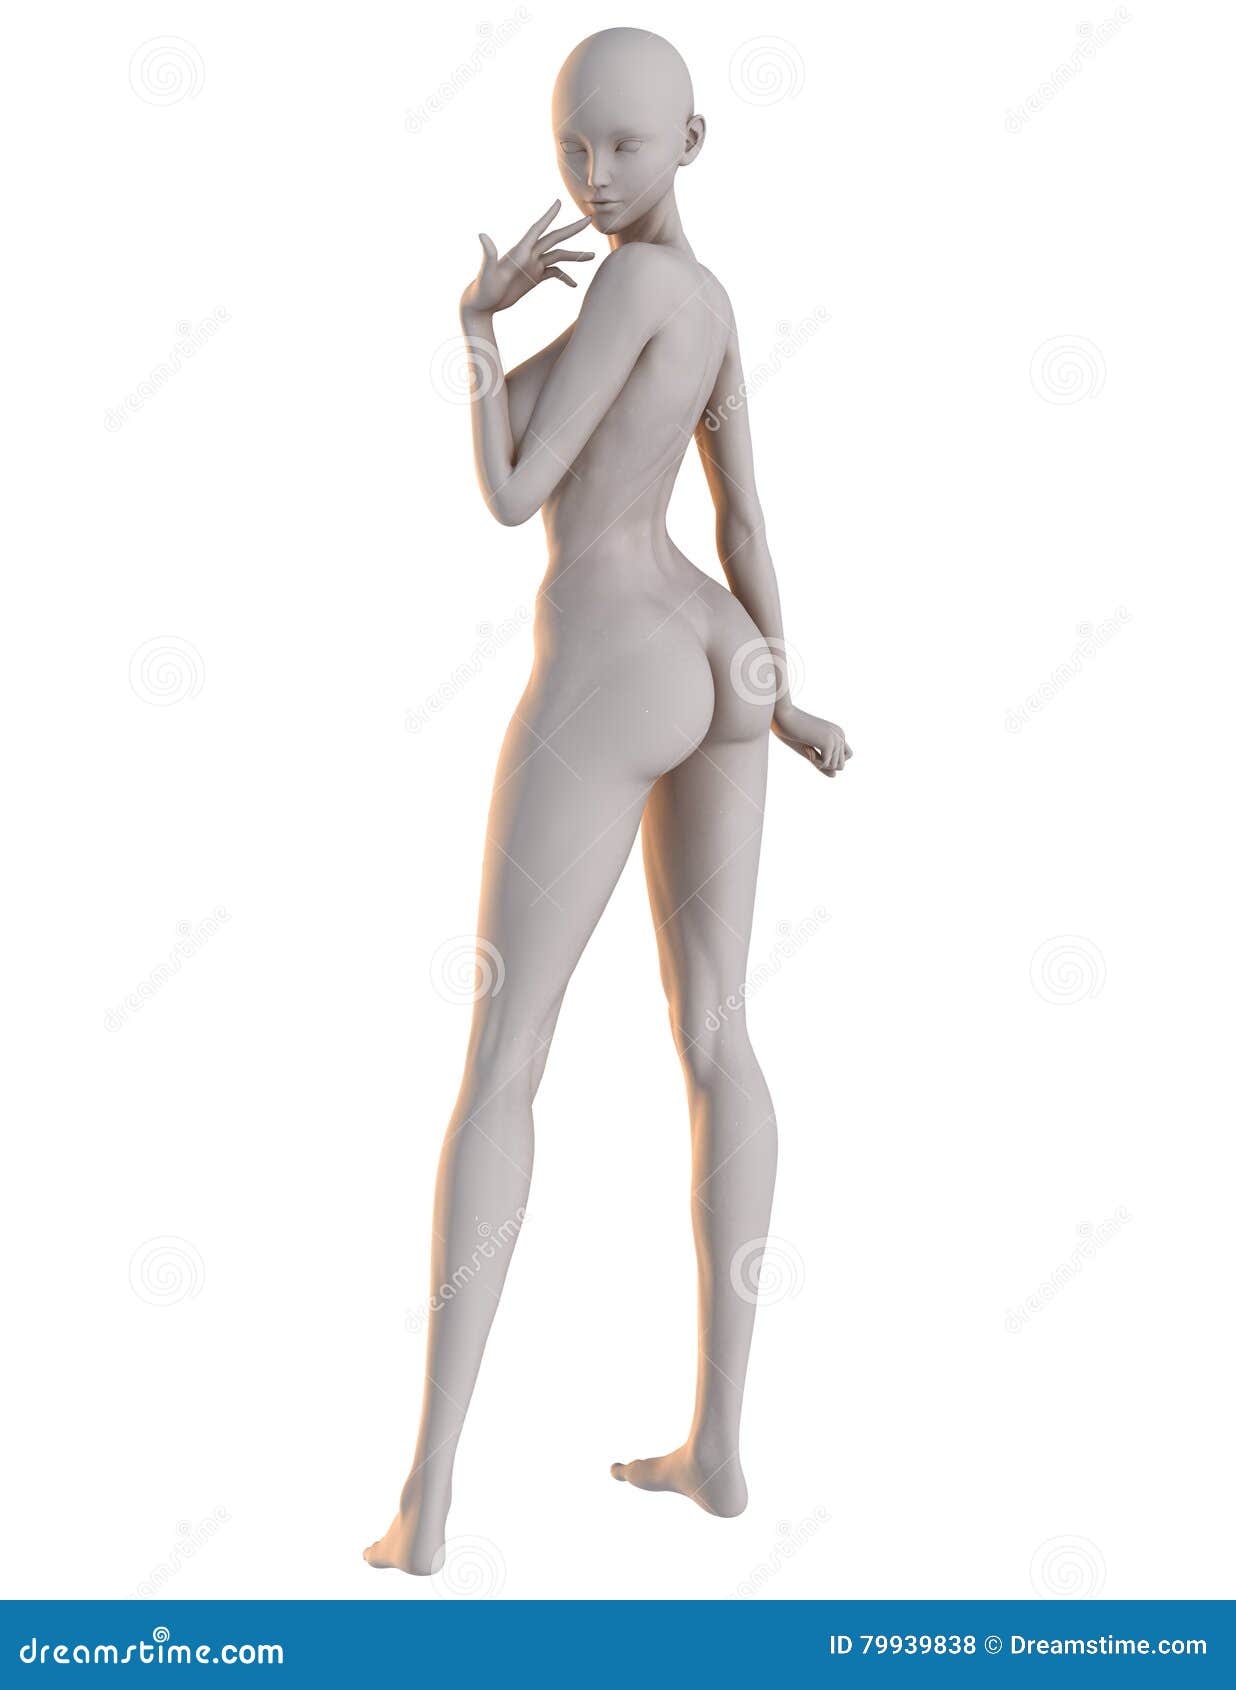 Anime Pose Reference - Woman standing, leaning forward and saying “ok” |  PoseMy.Art